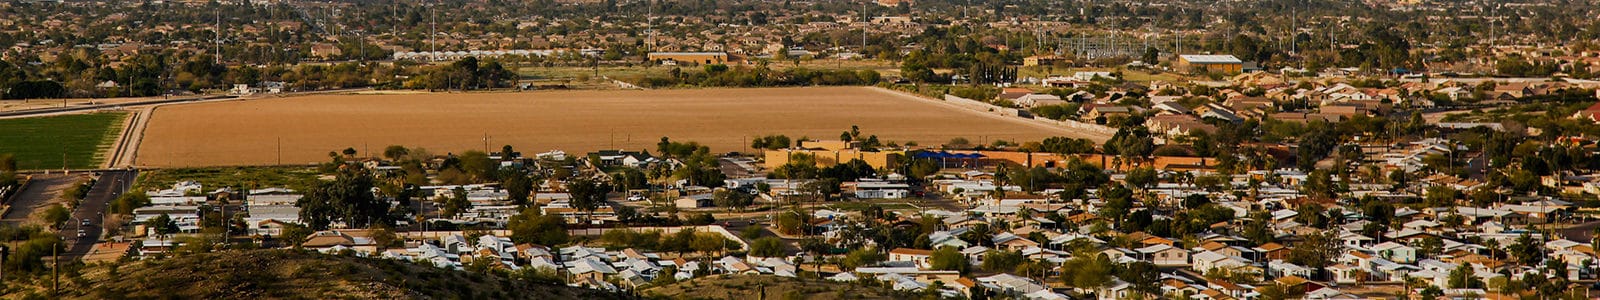 wide-angle view of neighborhoods and parks in the Arizona west valley